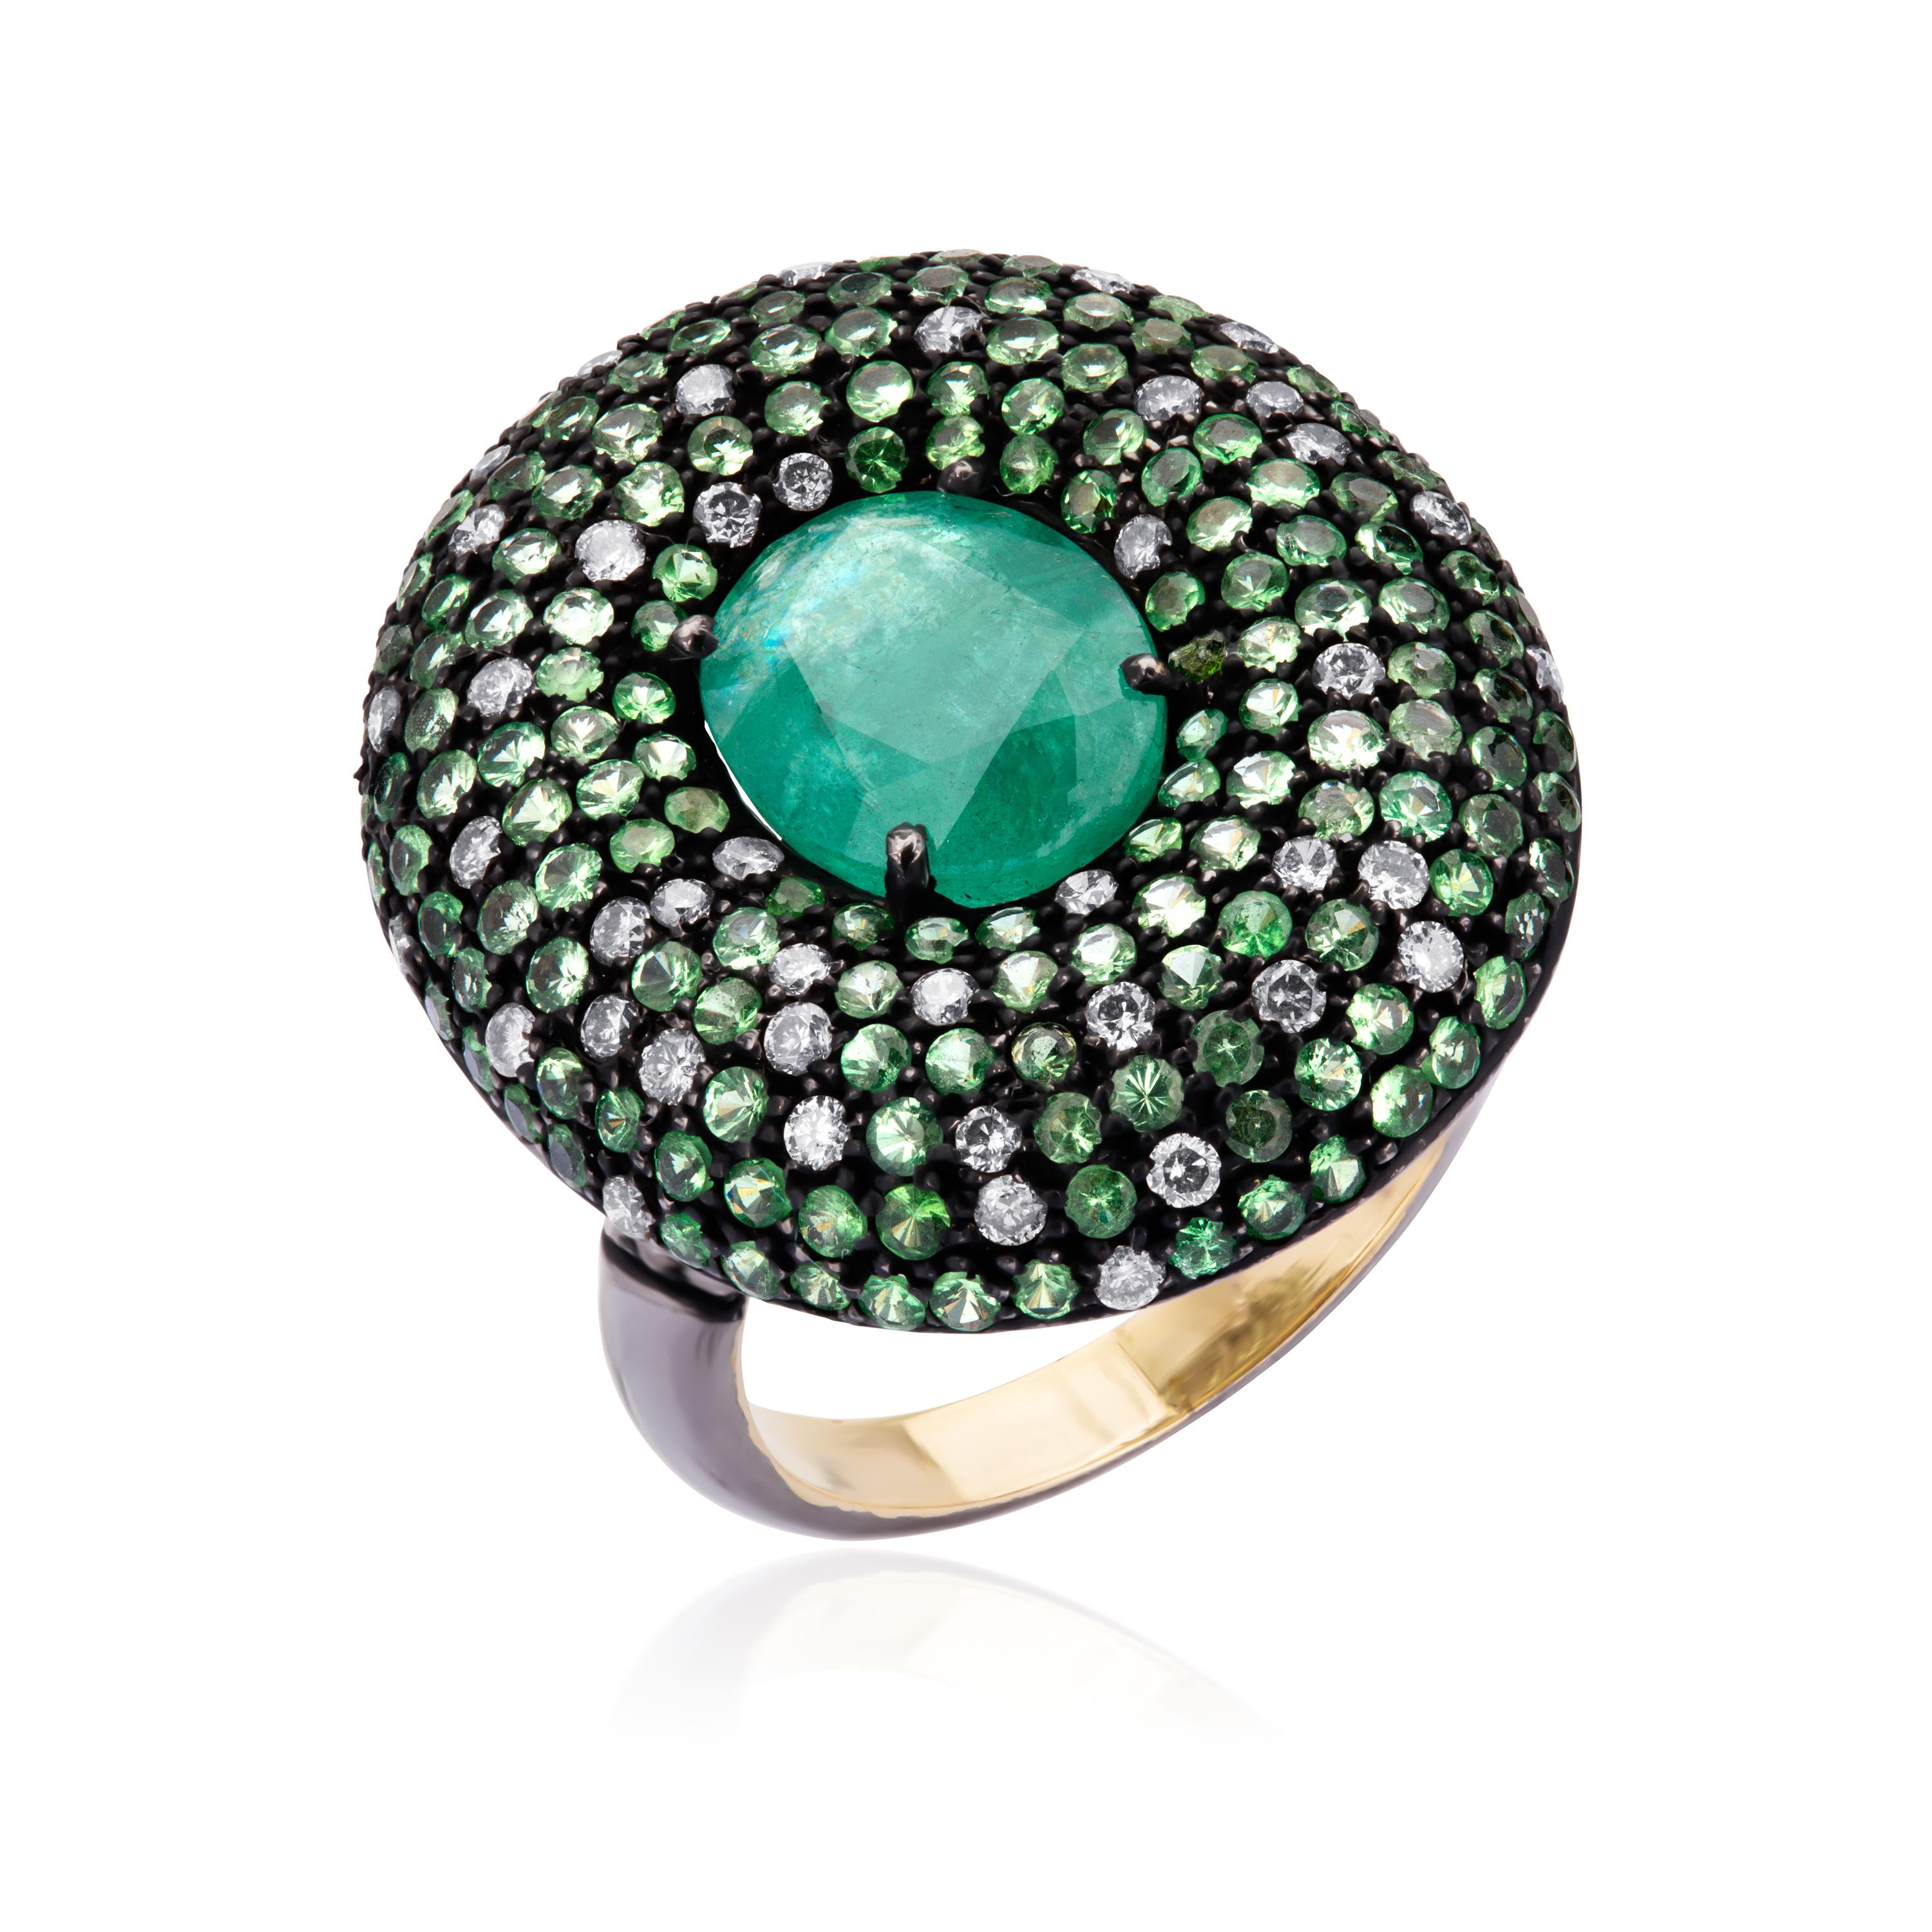 Hand fabricated in rhodium over 18K gold, this exquisite finger bauble, is crowned with an oval faceted emerald 2.67 Cts glittering within a curve circular frame embellished with diamonds (IJ Color, SI Clarity) and Tsavorite, all supported by